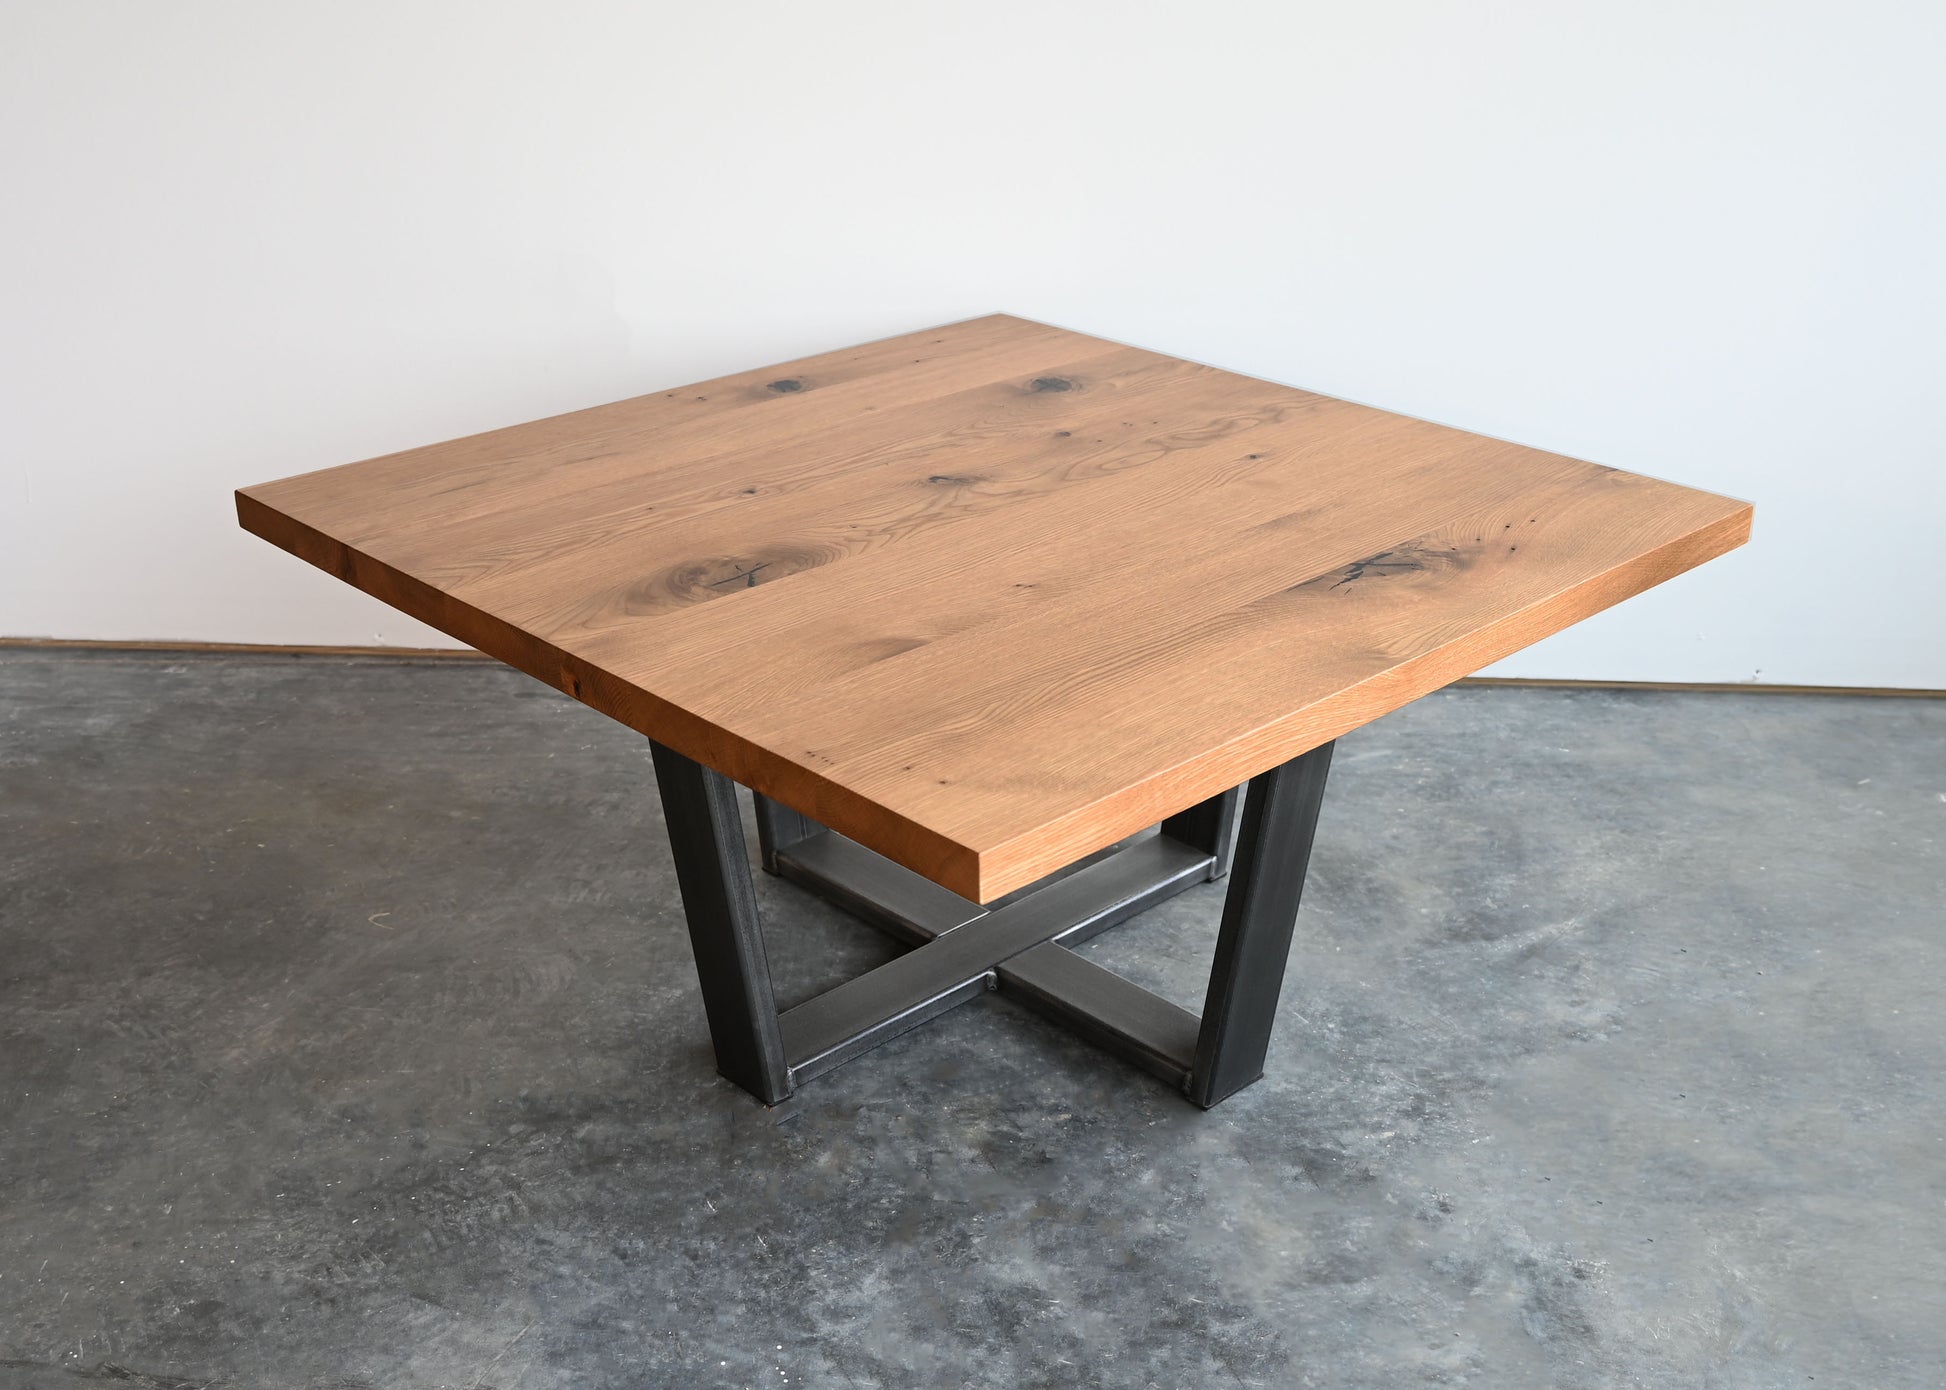 Coffee table made from locally sourced wood